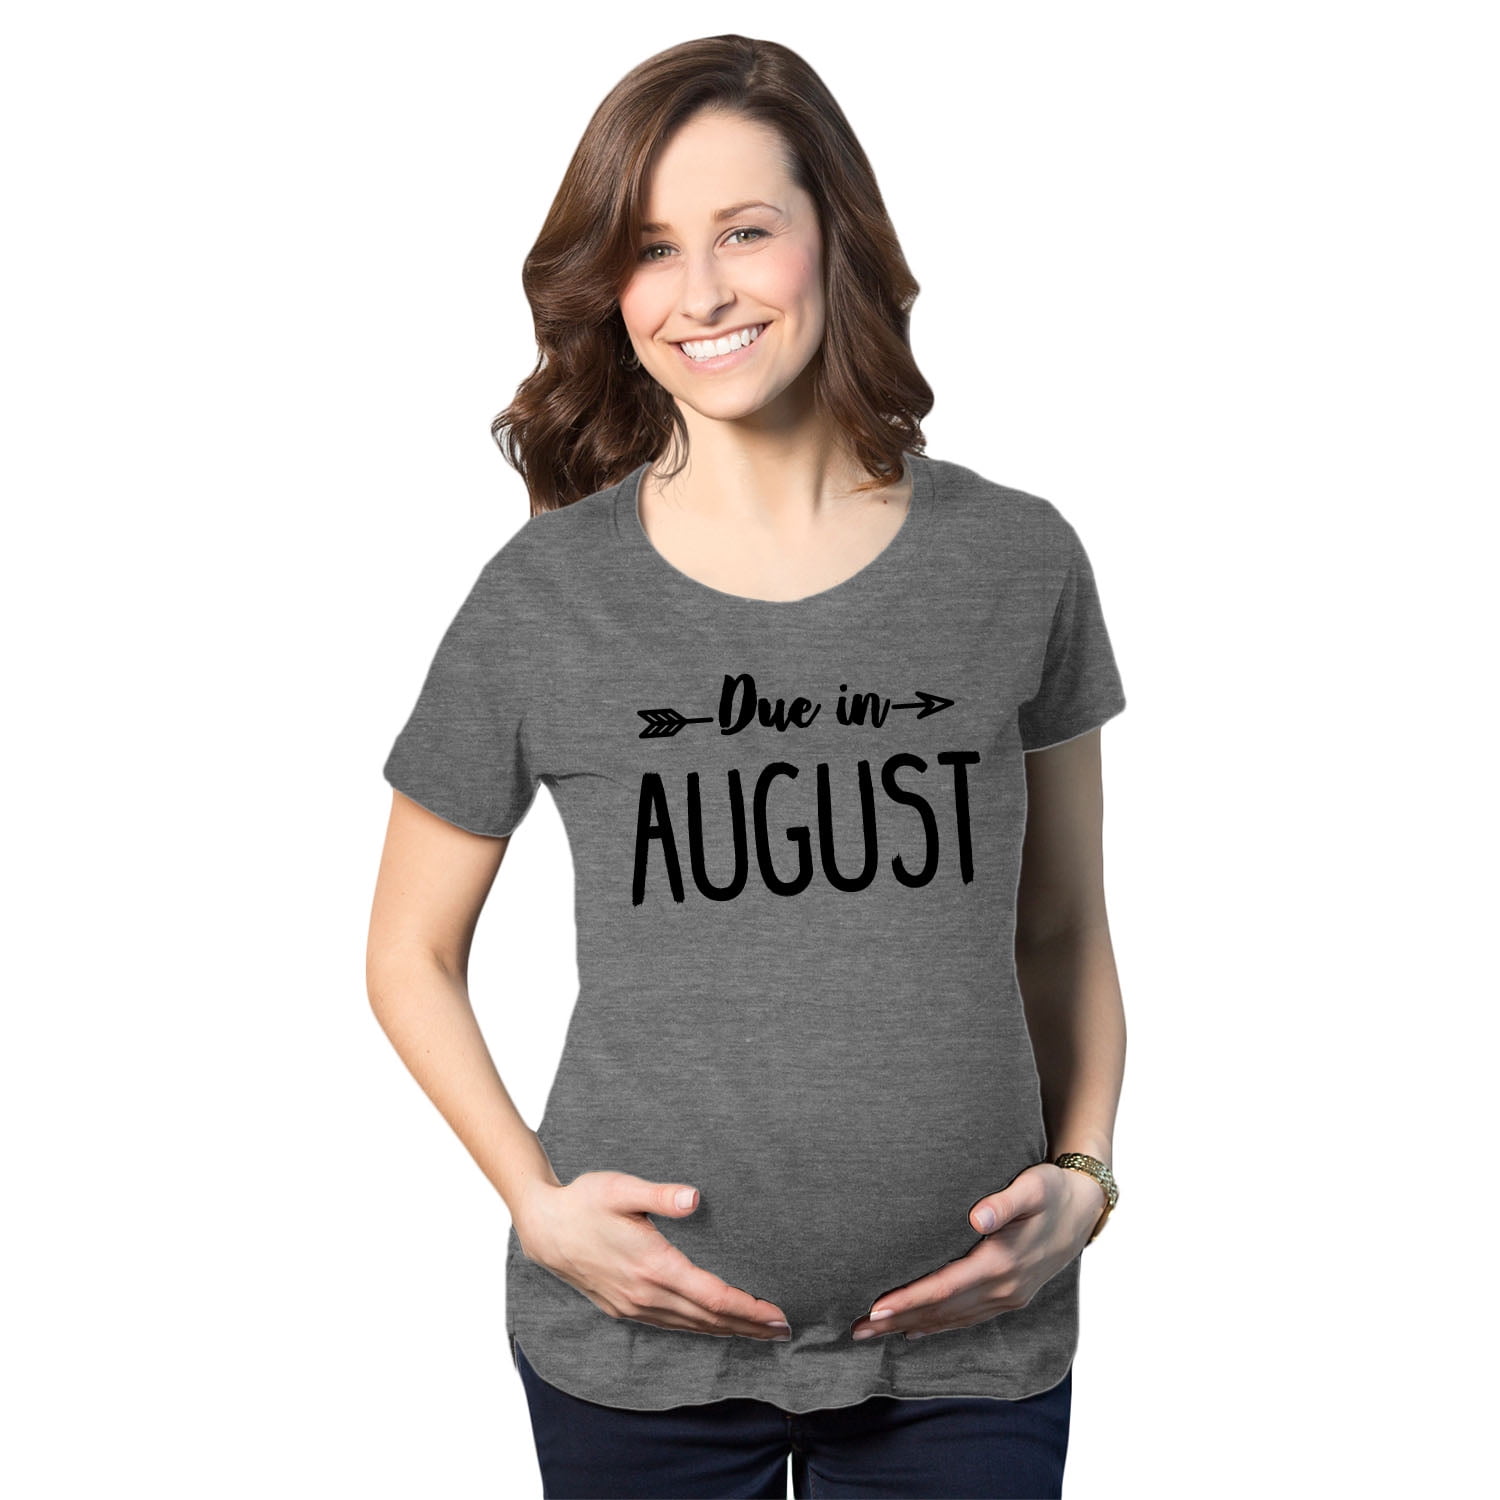 Funny pregnancy T-shirt Maternity Shirt Reveal Announcement Expecting Tee Tops 